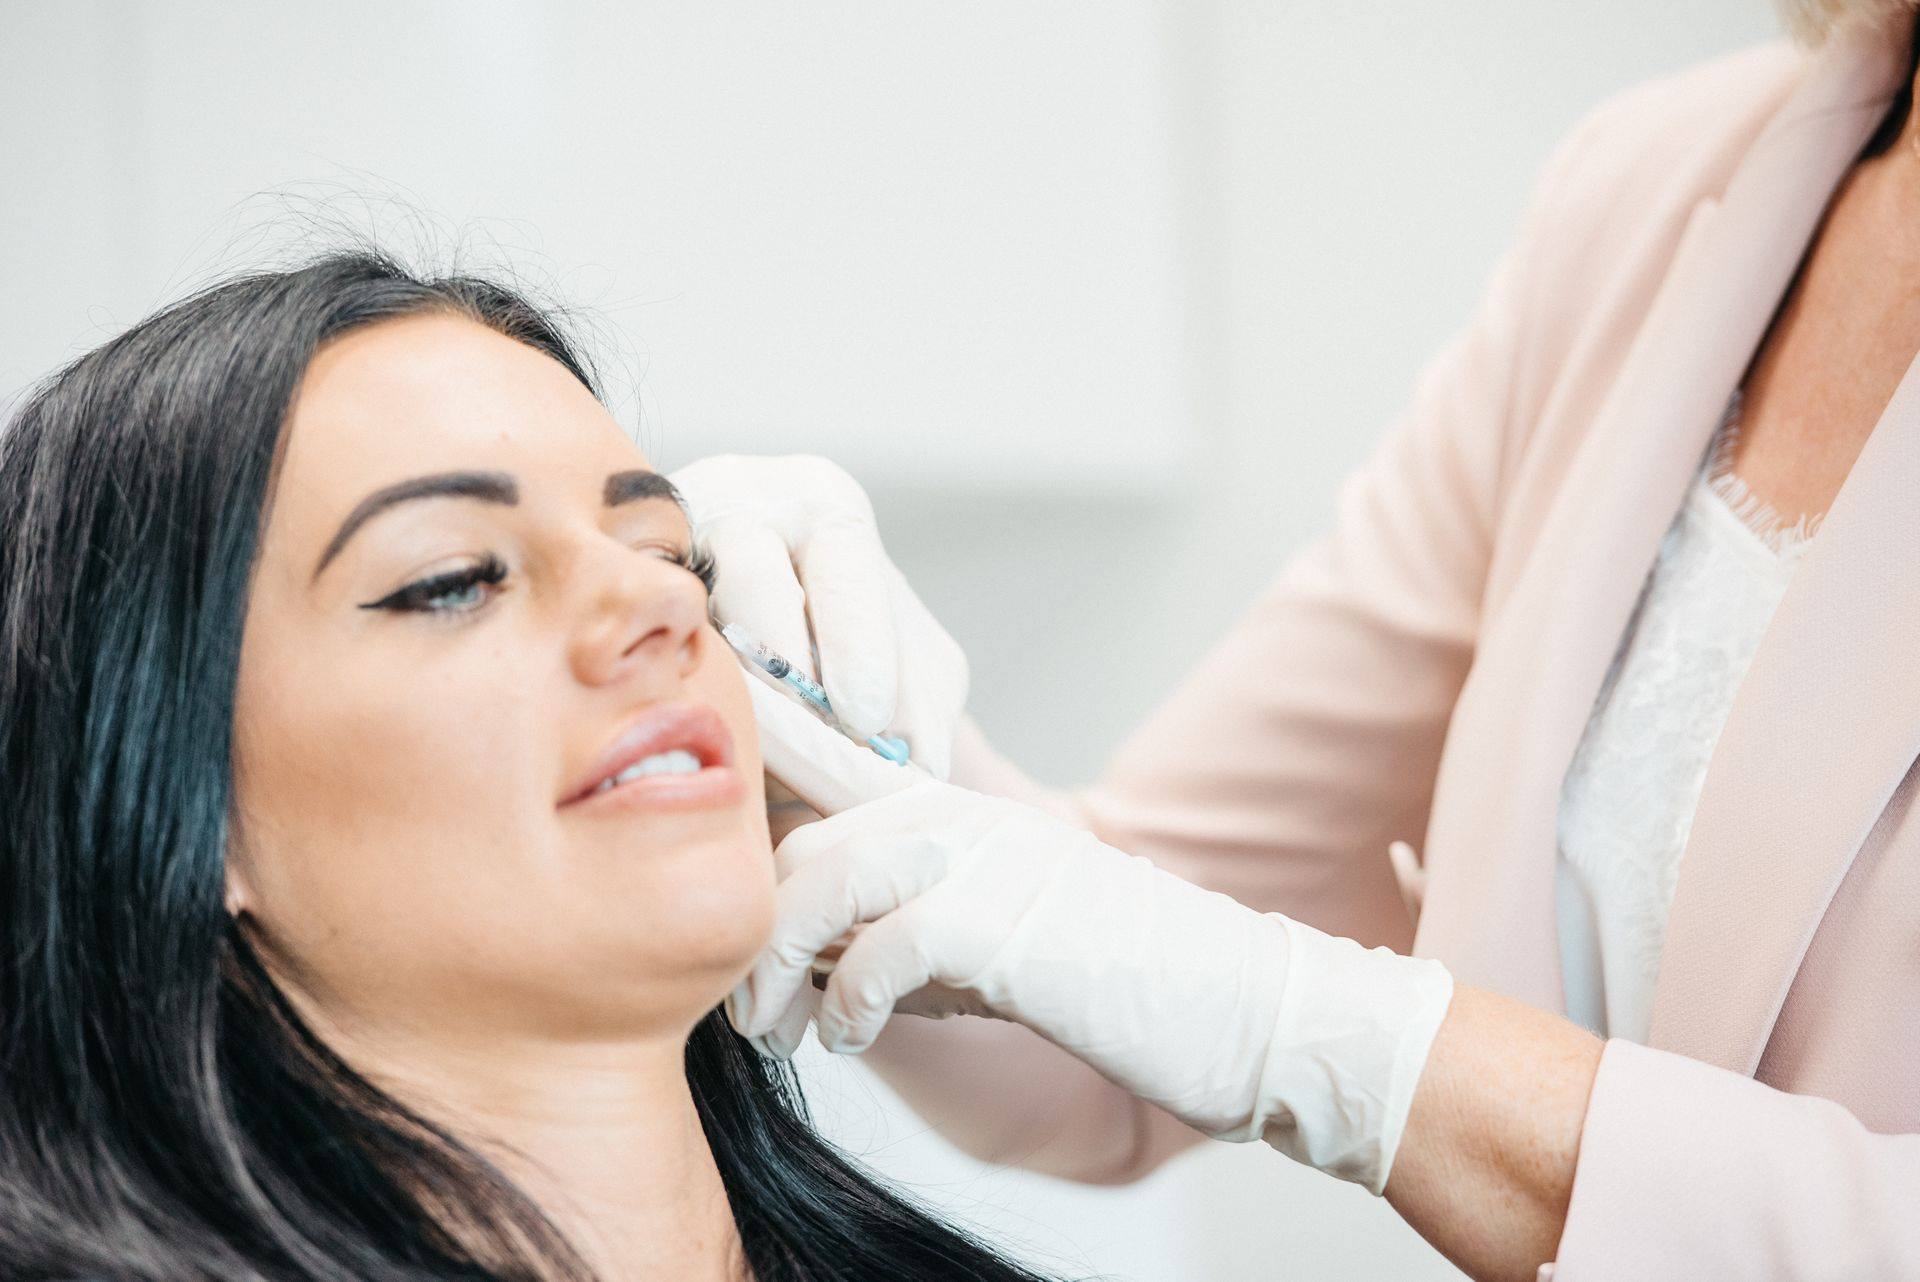 A dermal filler is a Hyaluronic acid gel that is used to add volume, smooth fine lines, wrinkles, stimulate collagen production and hydrate the skin. 